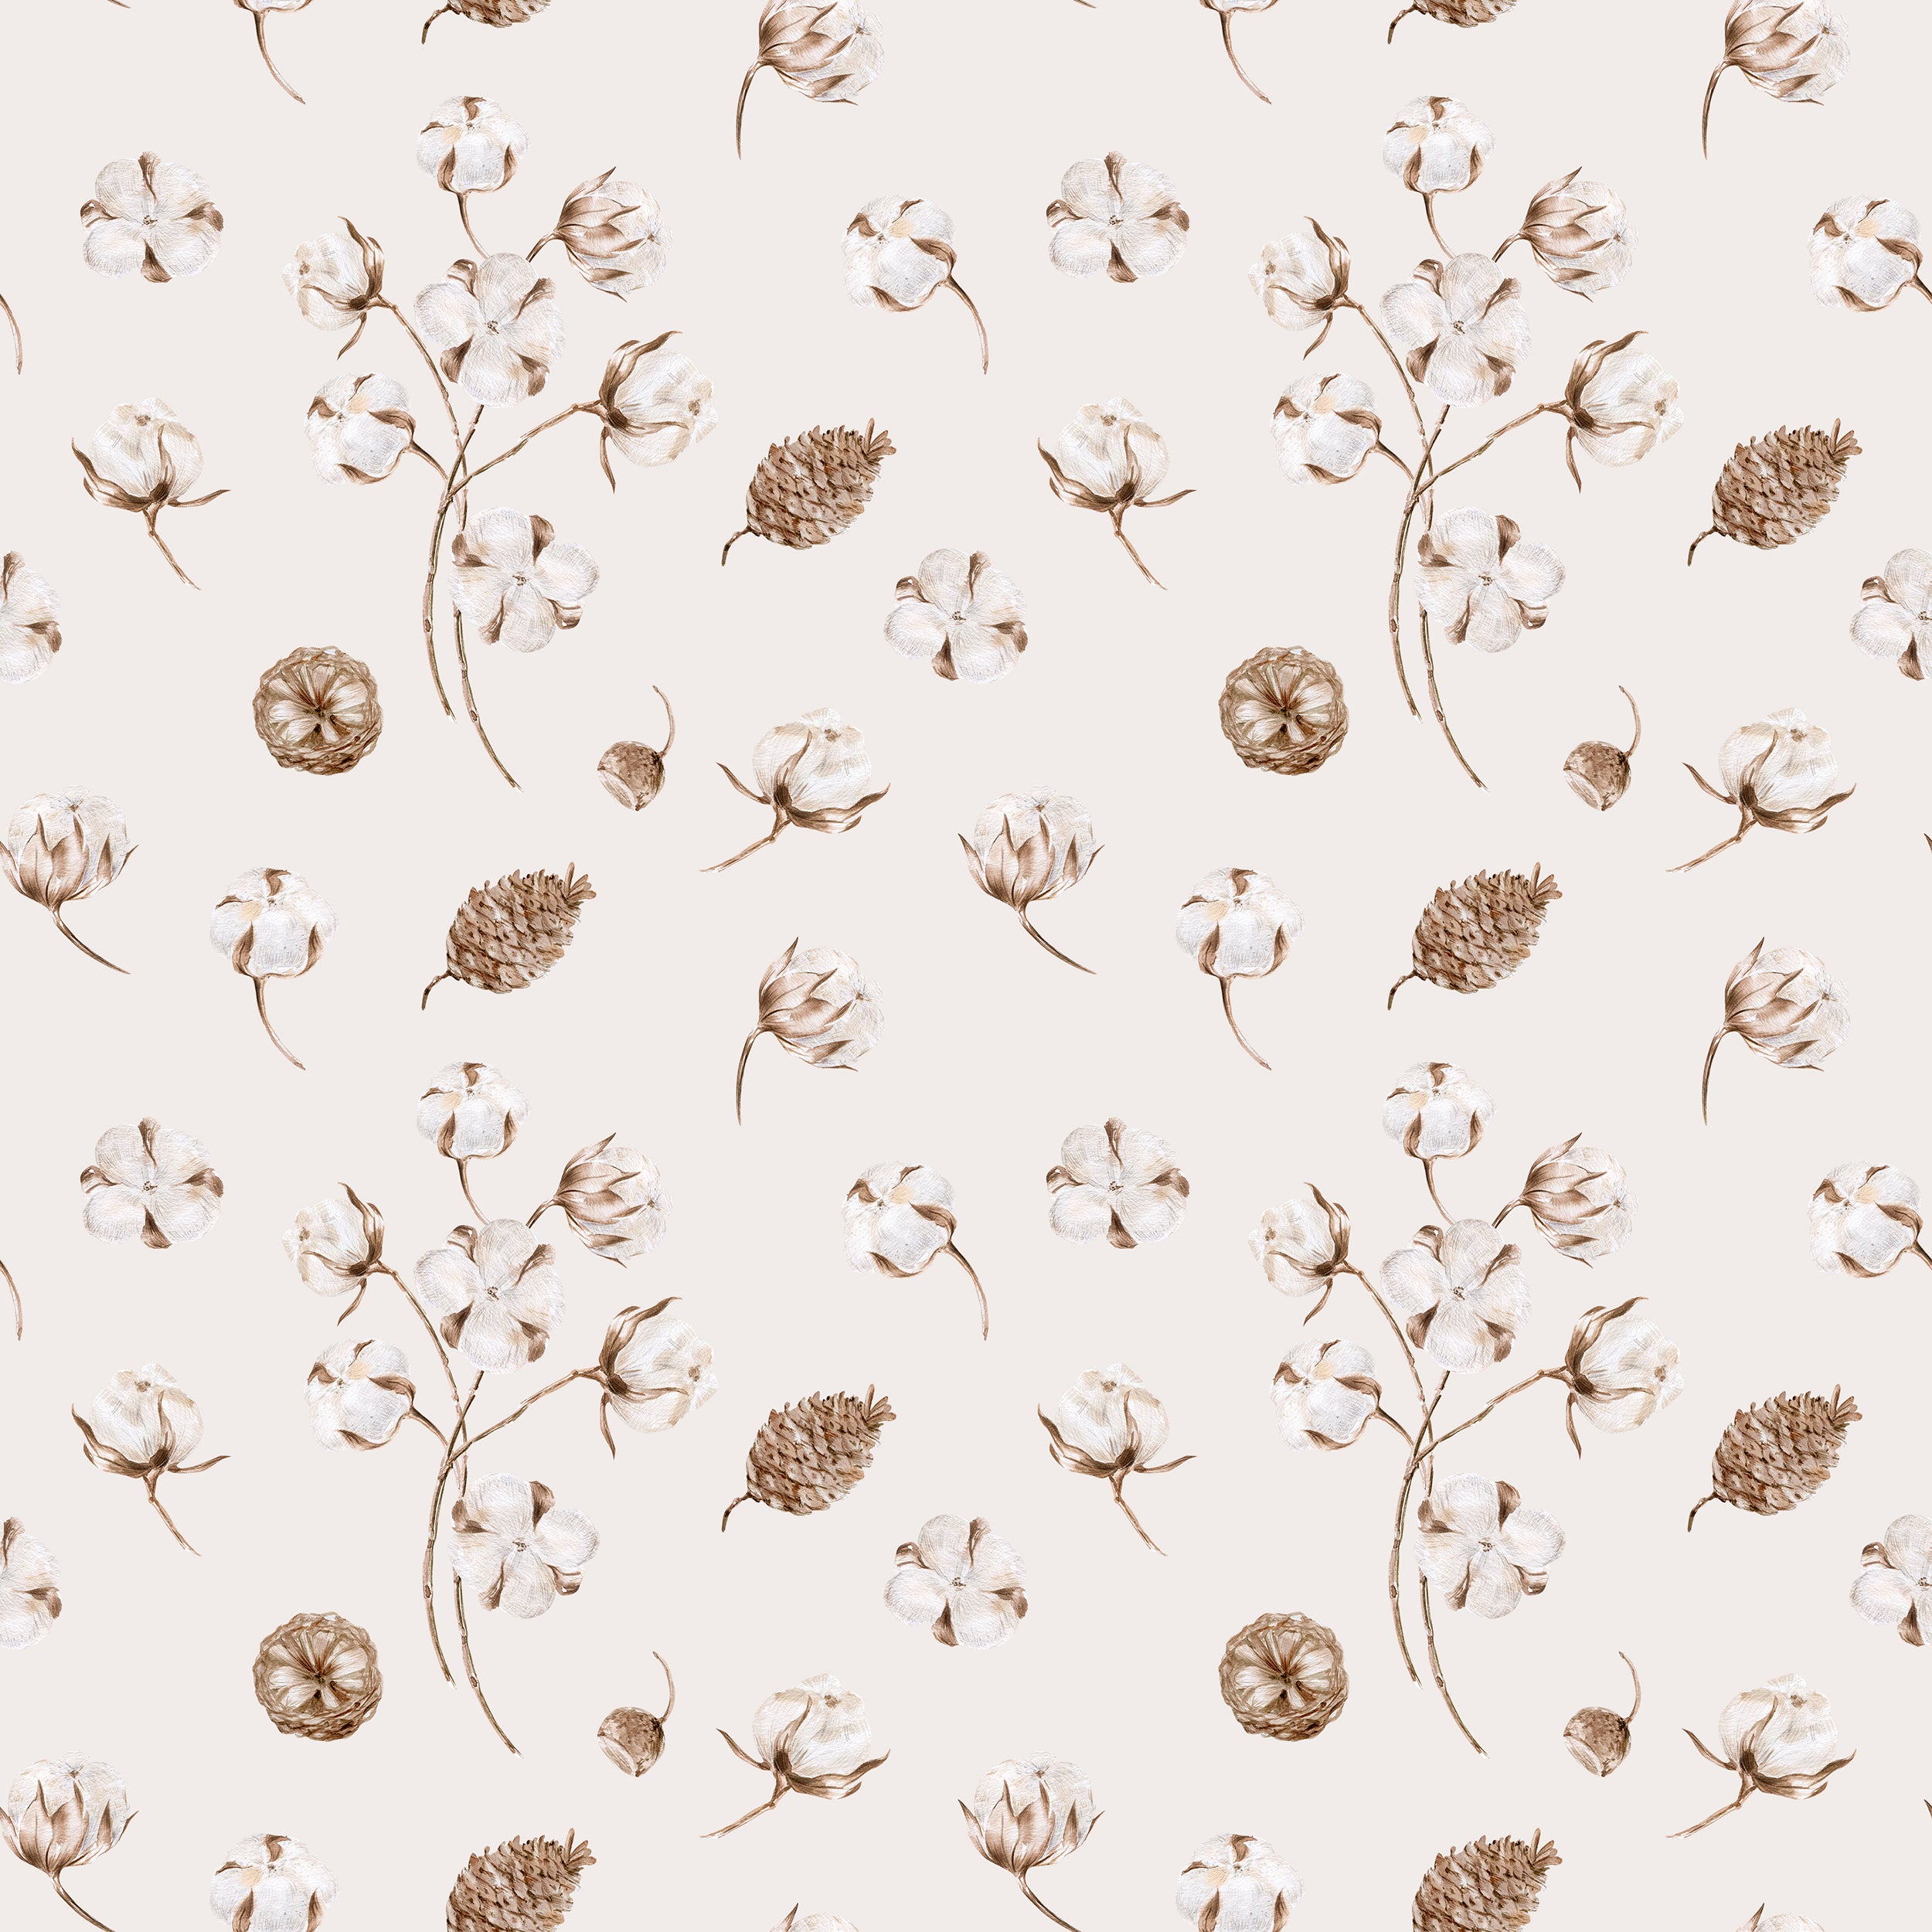 Close-up view of the Winter Boho Wallpaper displaying a detailed pattern of rustic botanical elements such as cotton bolls and pine cones, rendered in soft browns and beiges on a creamy background, perfect for creating a cozy, natural ambiance